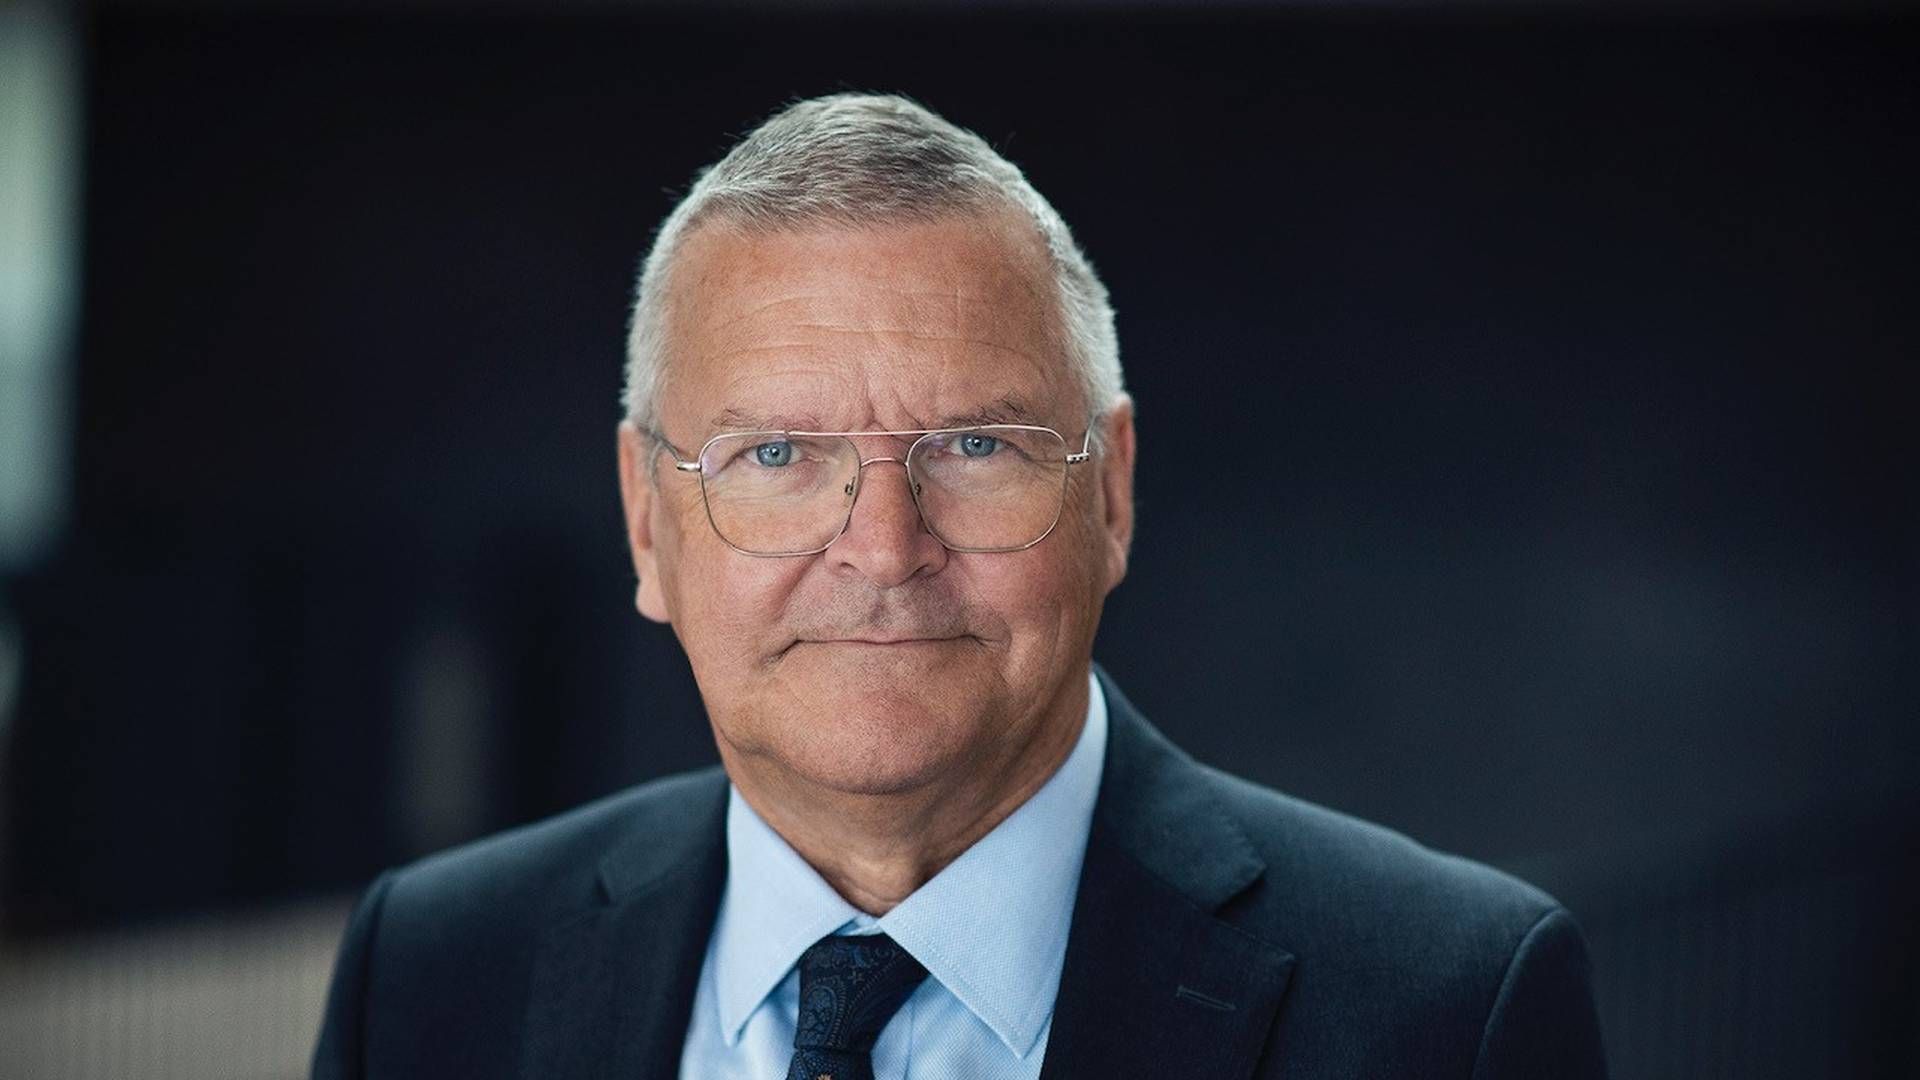 Lars Rohde was governor of Denmark's central bank, Nationalbanken, for ten years. | Photo: Alecta / PR